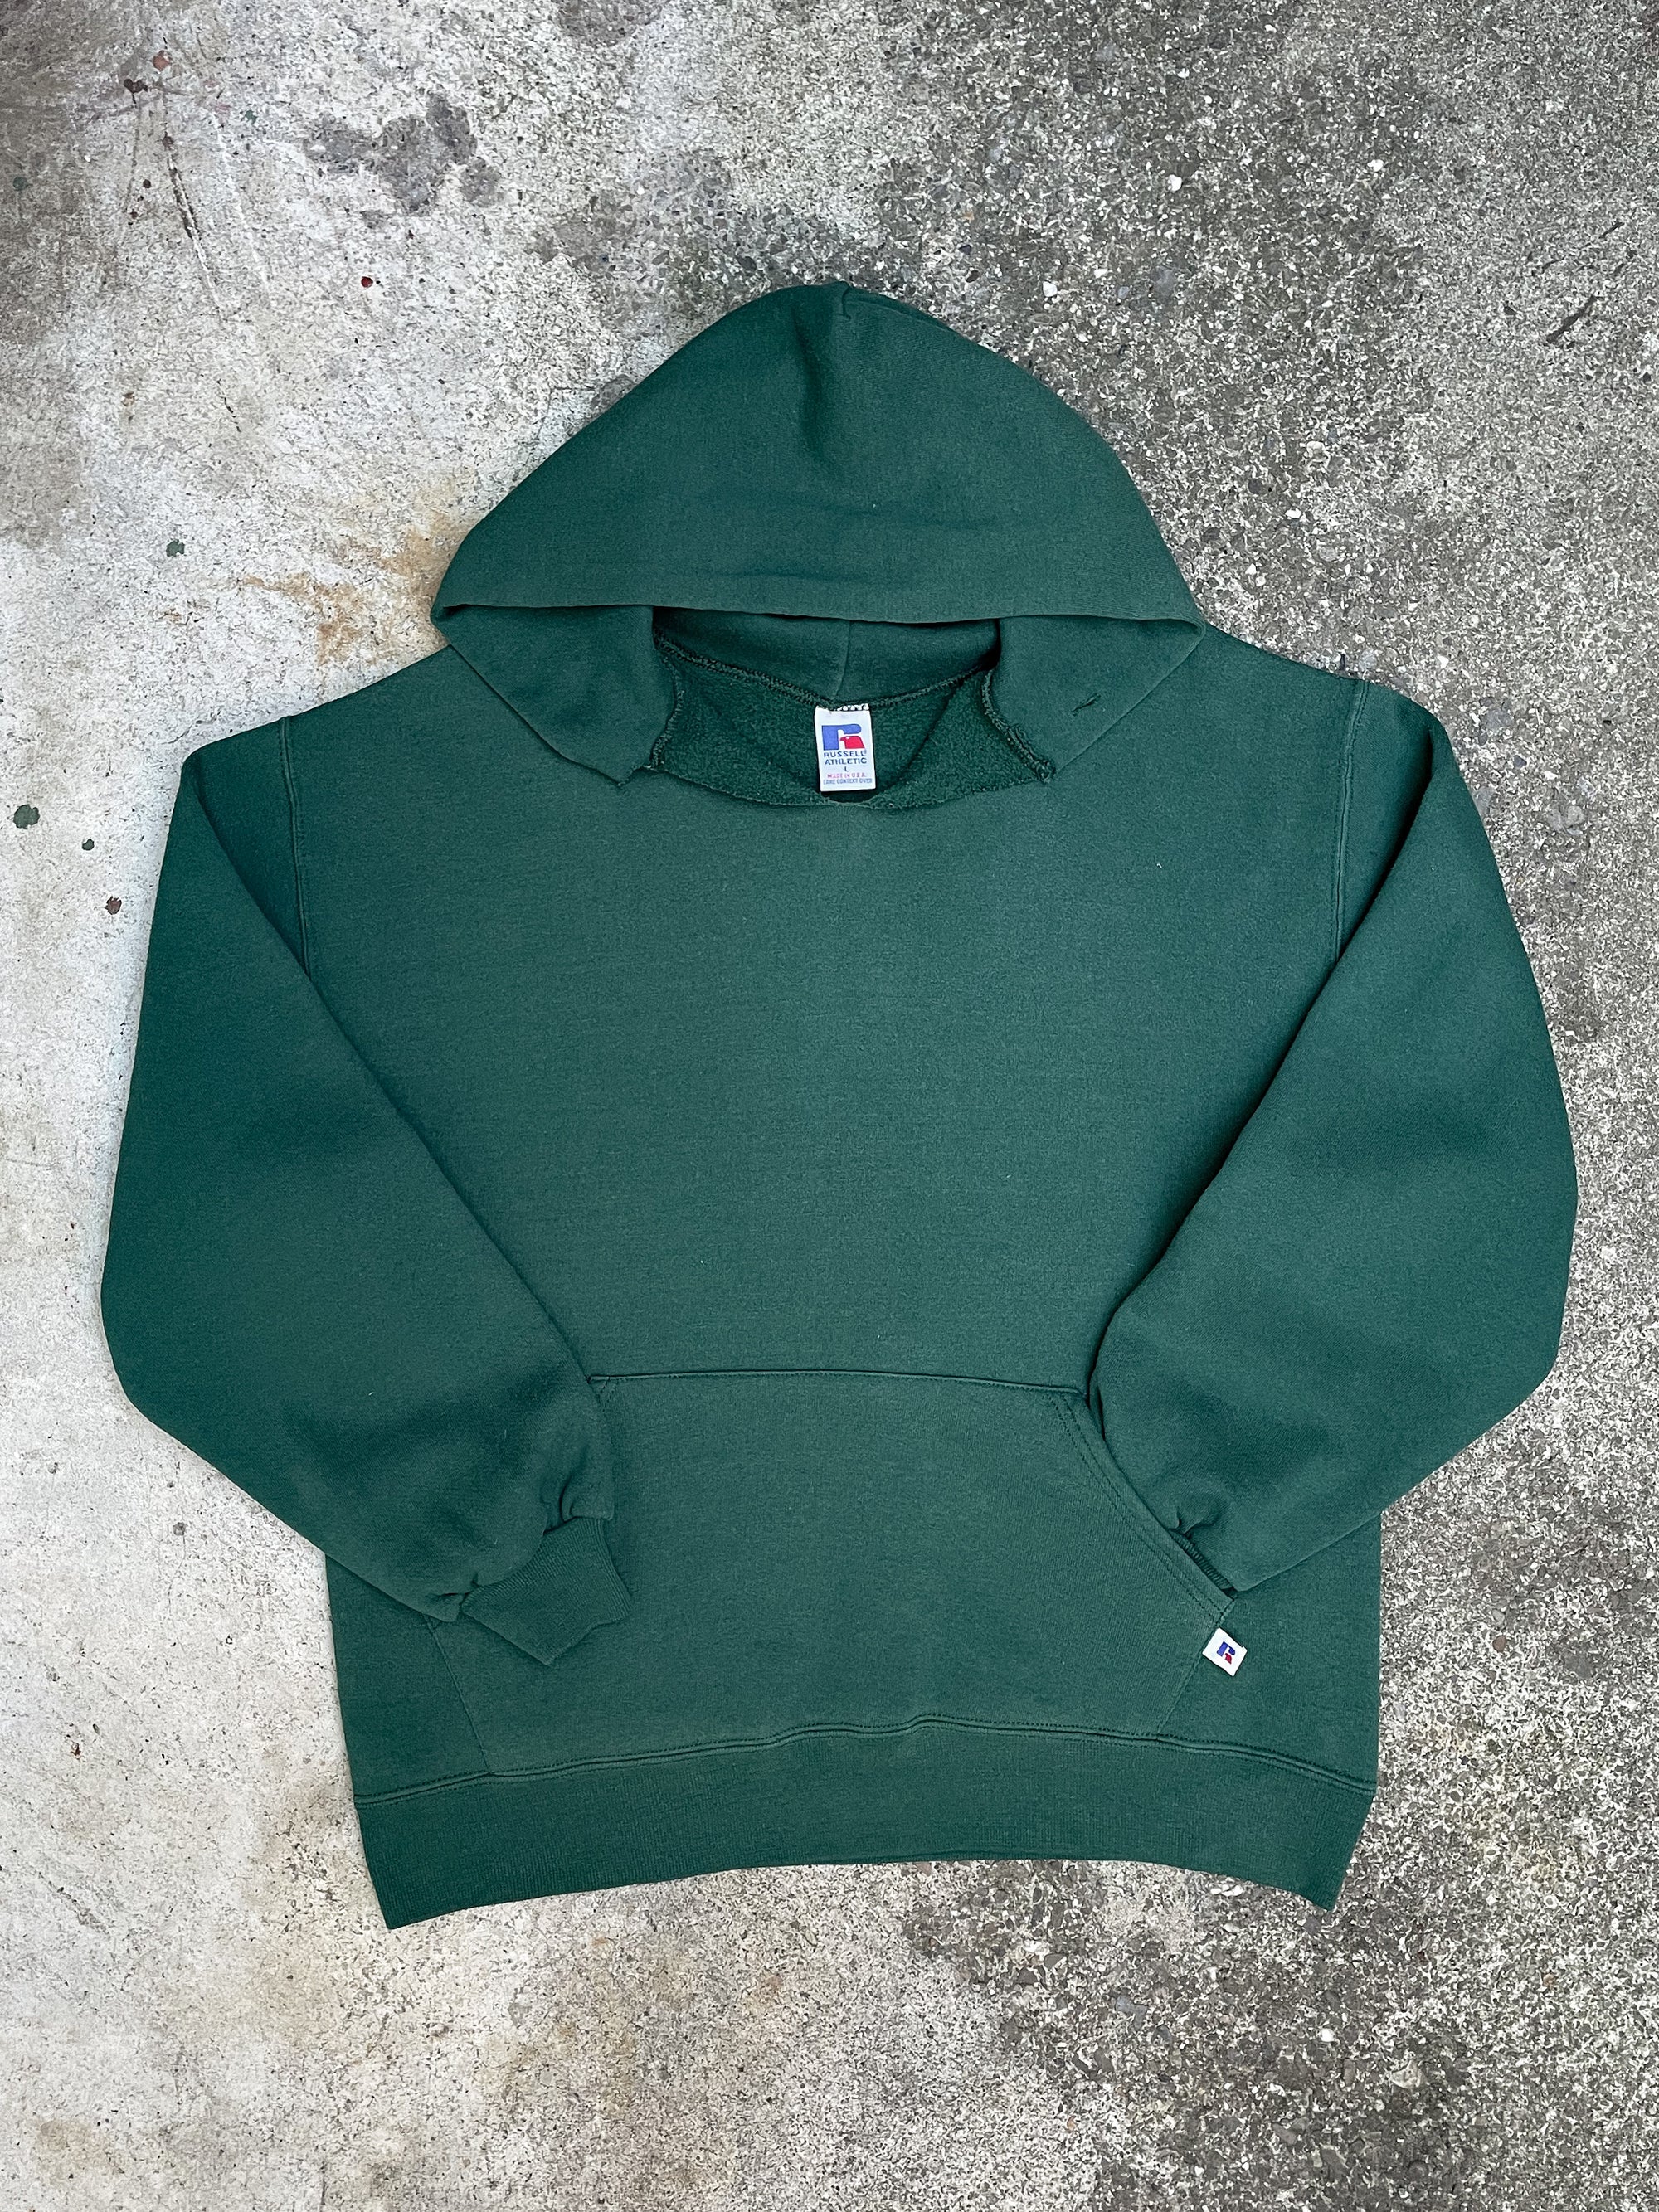 1990s Russell Distressed Faded Green Blank Hoodie (L)